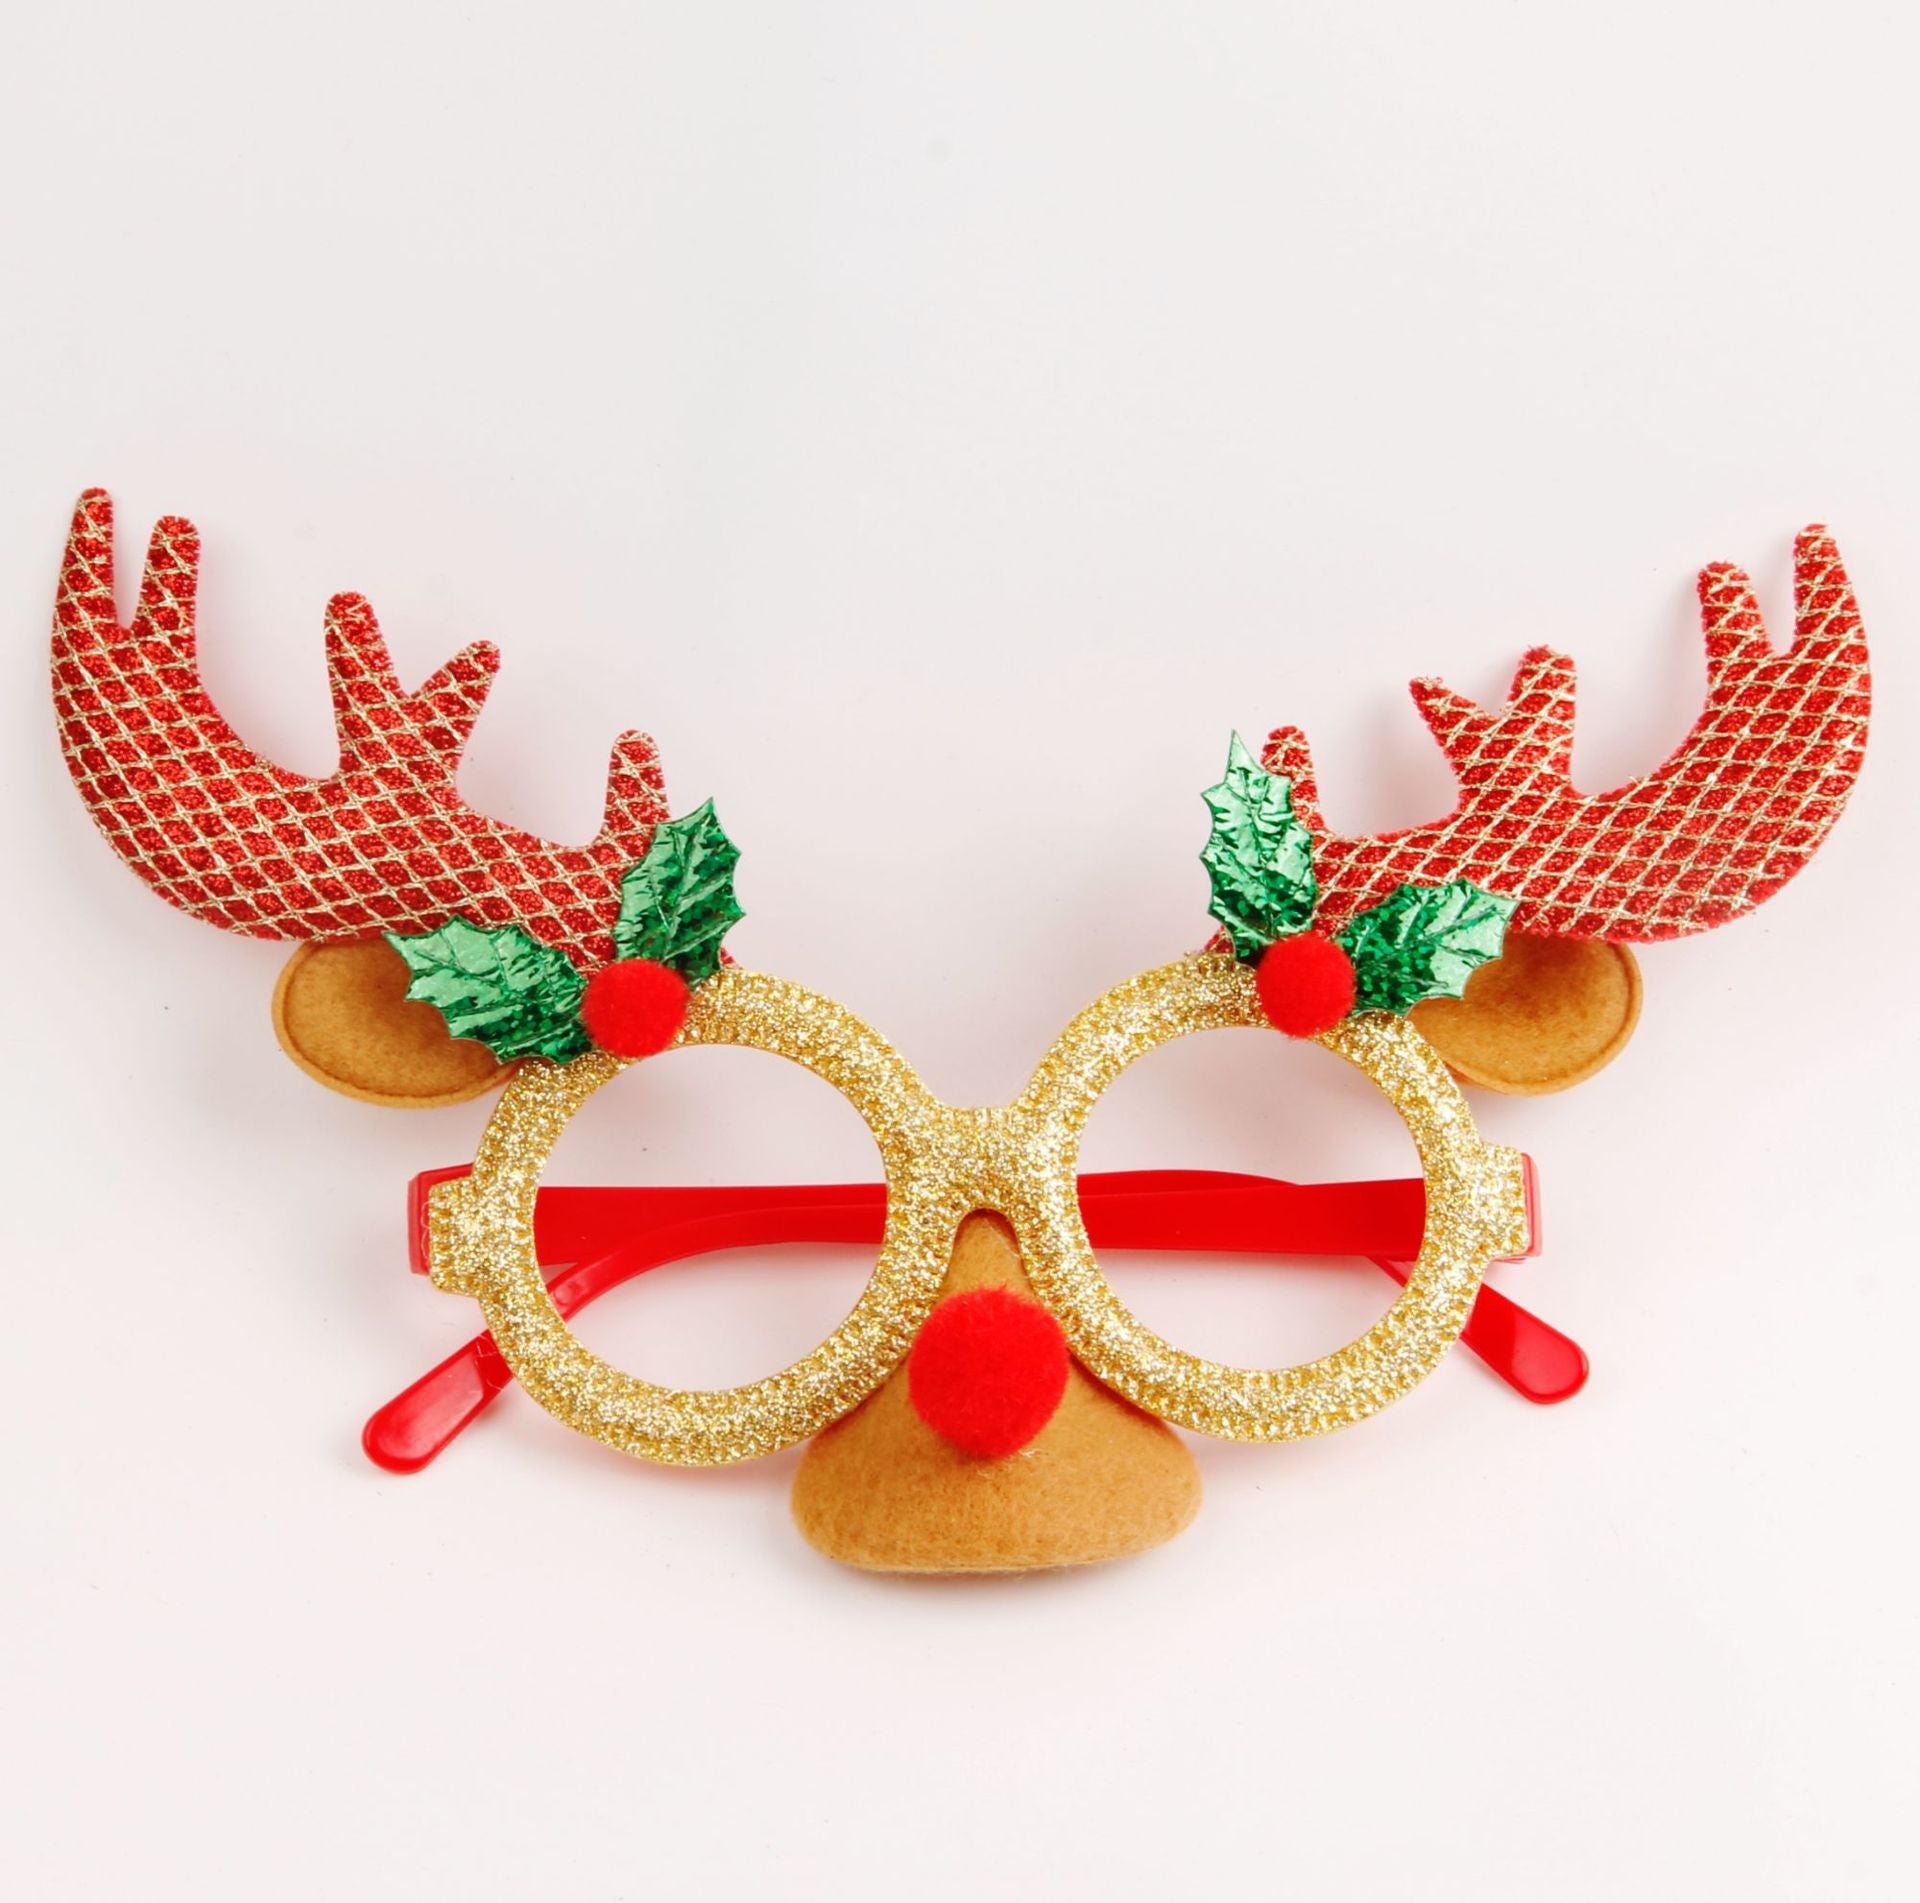 Christmas Decorations Dance Party Glasses Dress Up Props